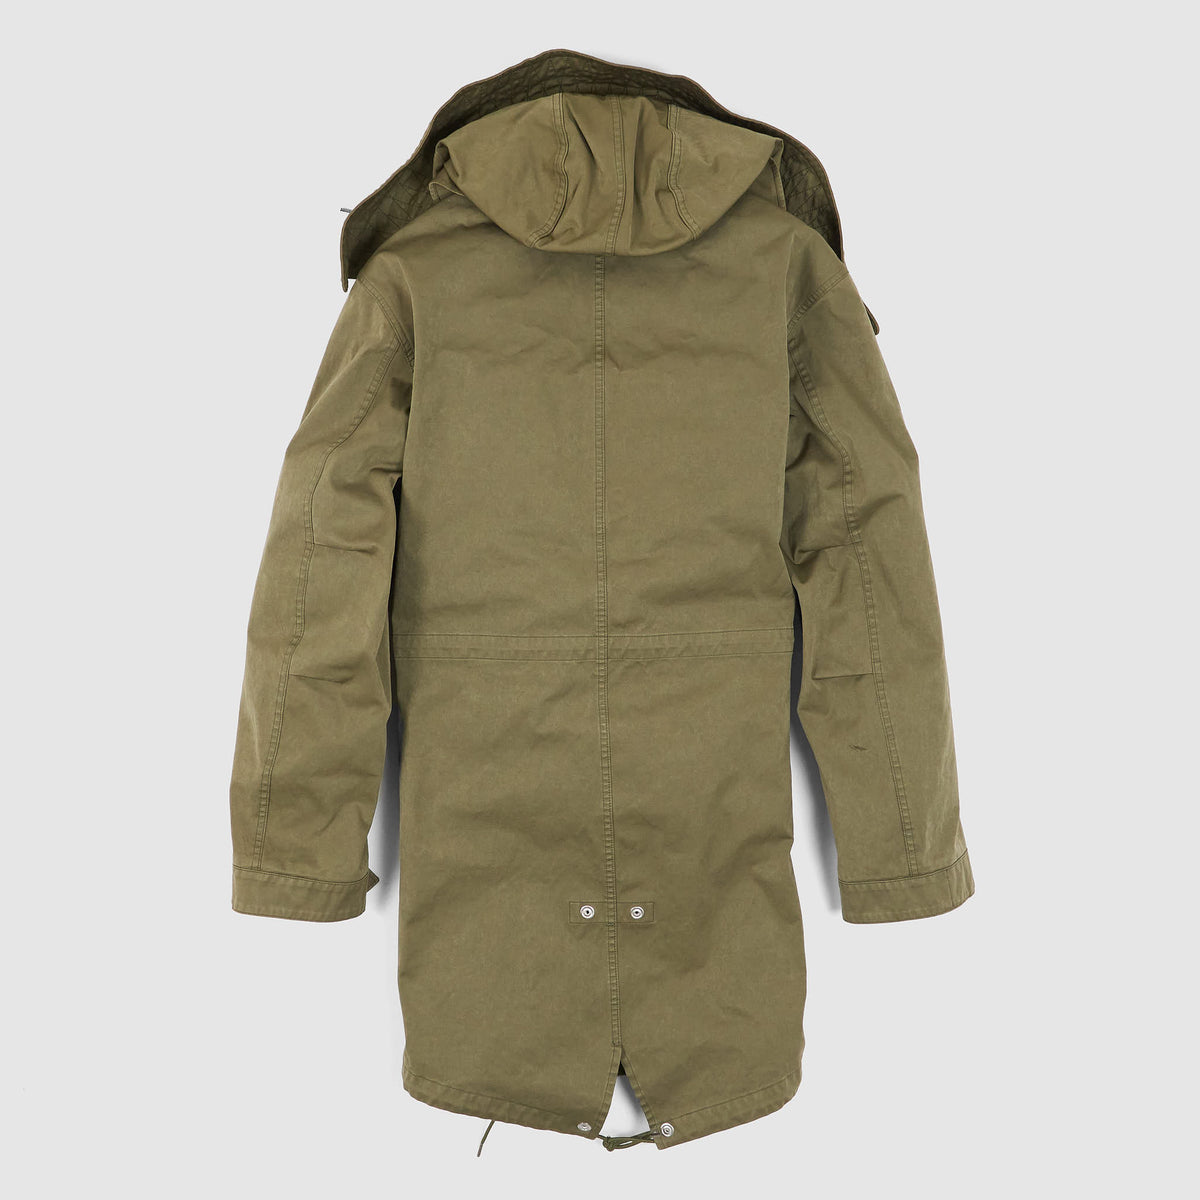 Ten c Fishtail Parka 3 in 1 Complete with Down Lining